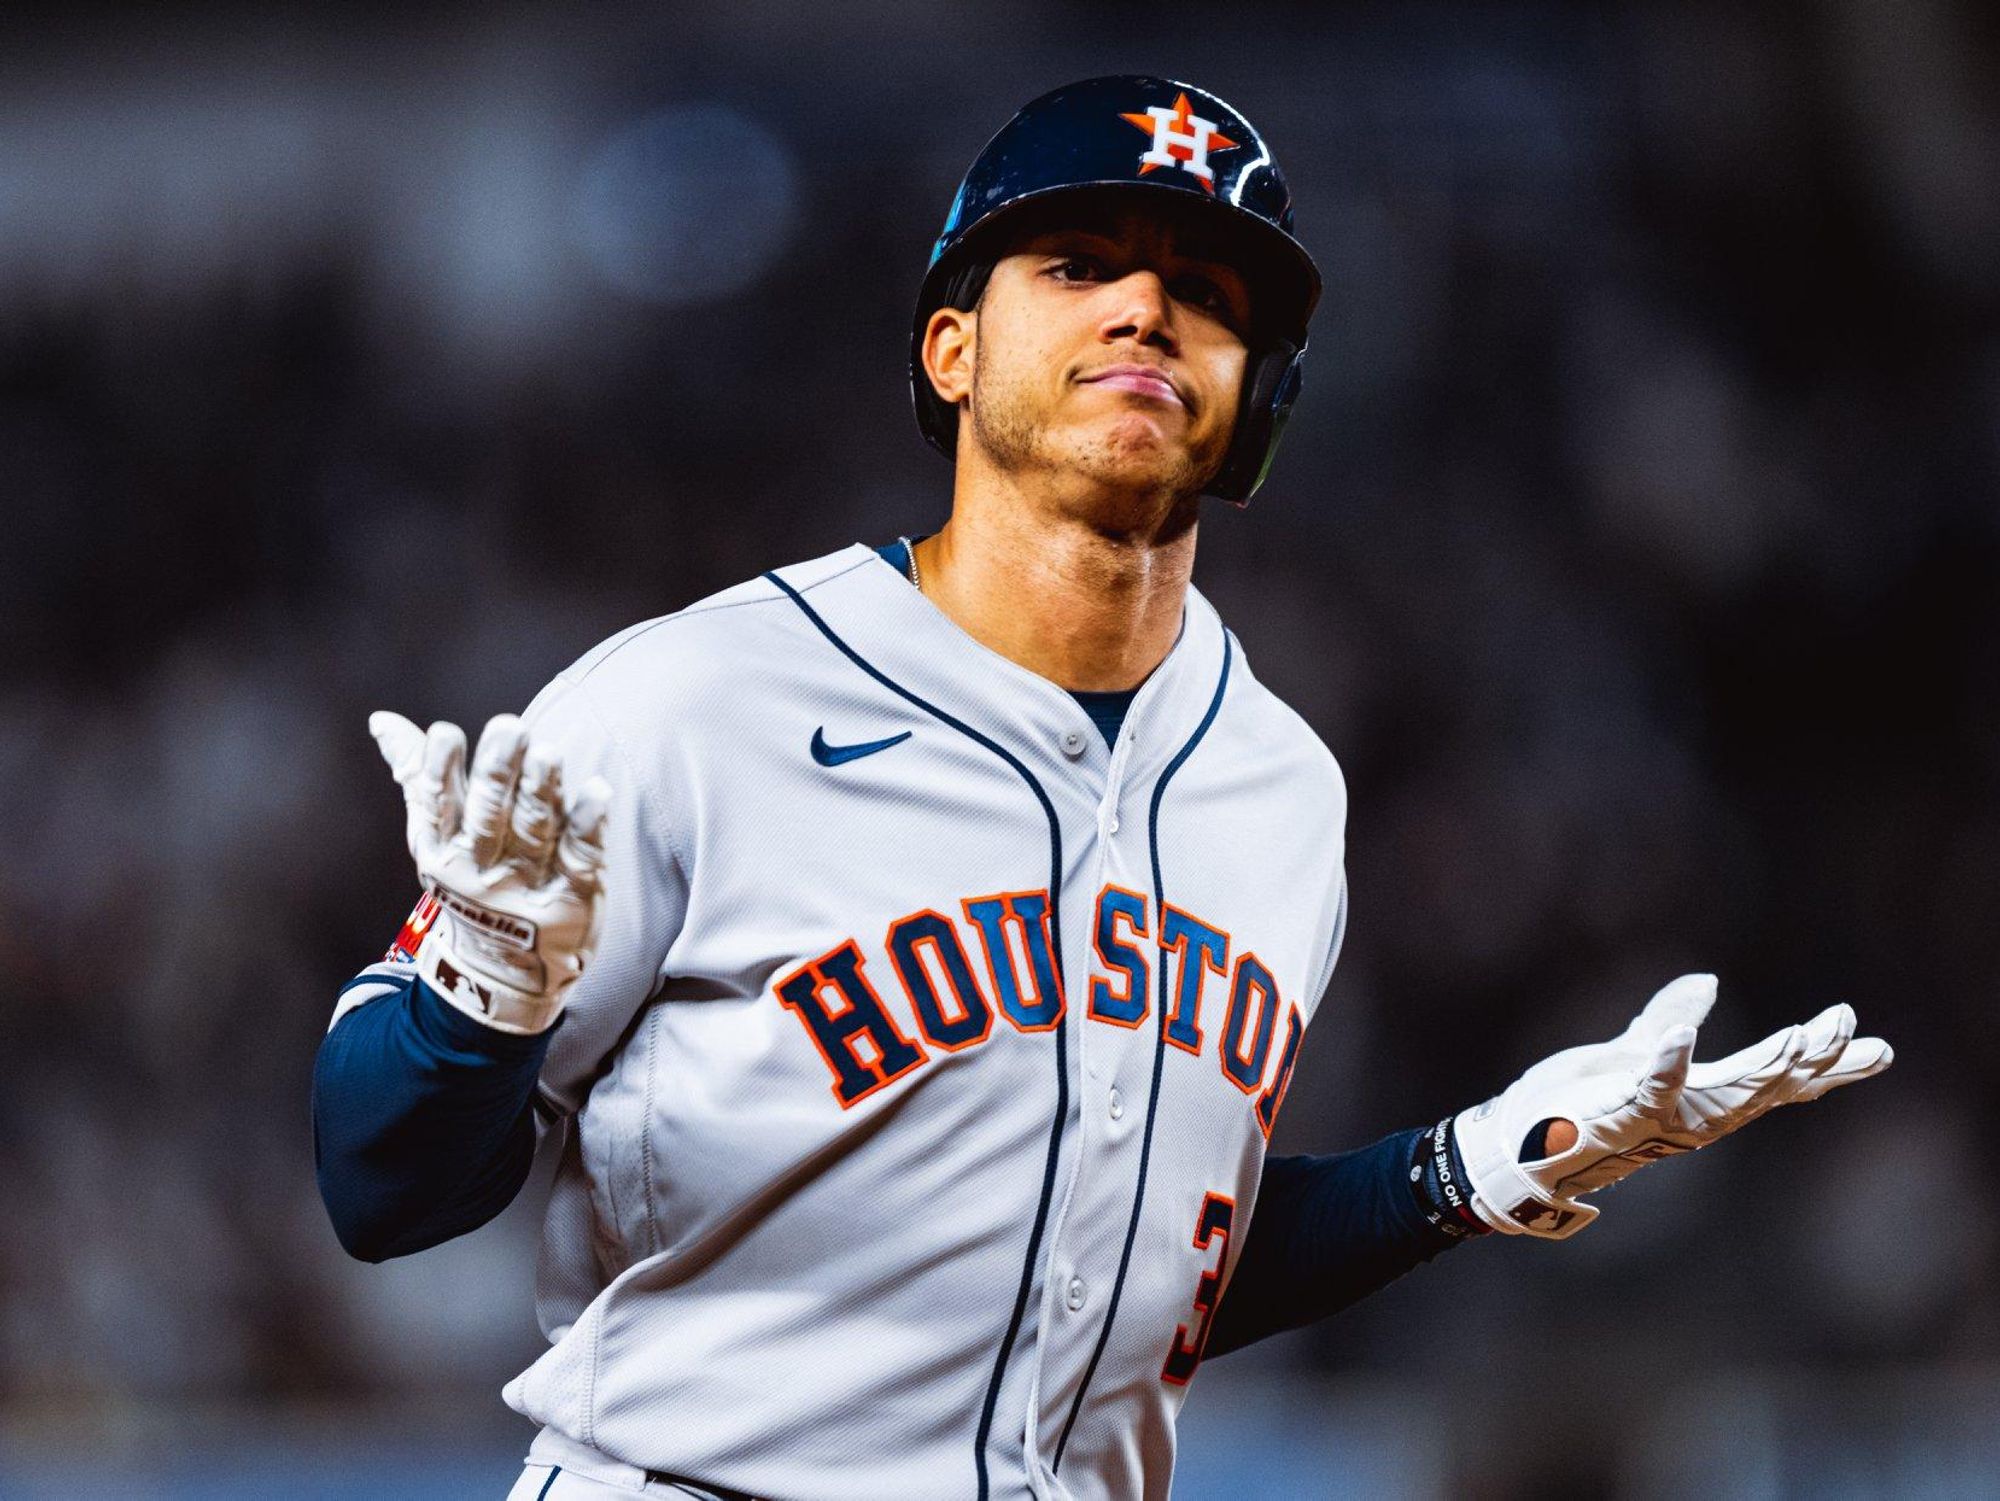 Sorry haters, here's why the Astros have cemented favorite status in Houston  - CultureMap Houston